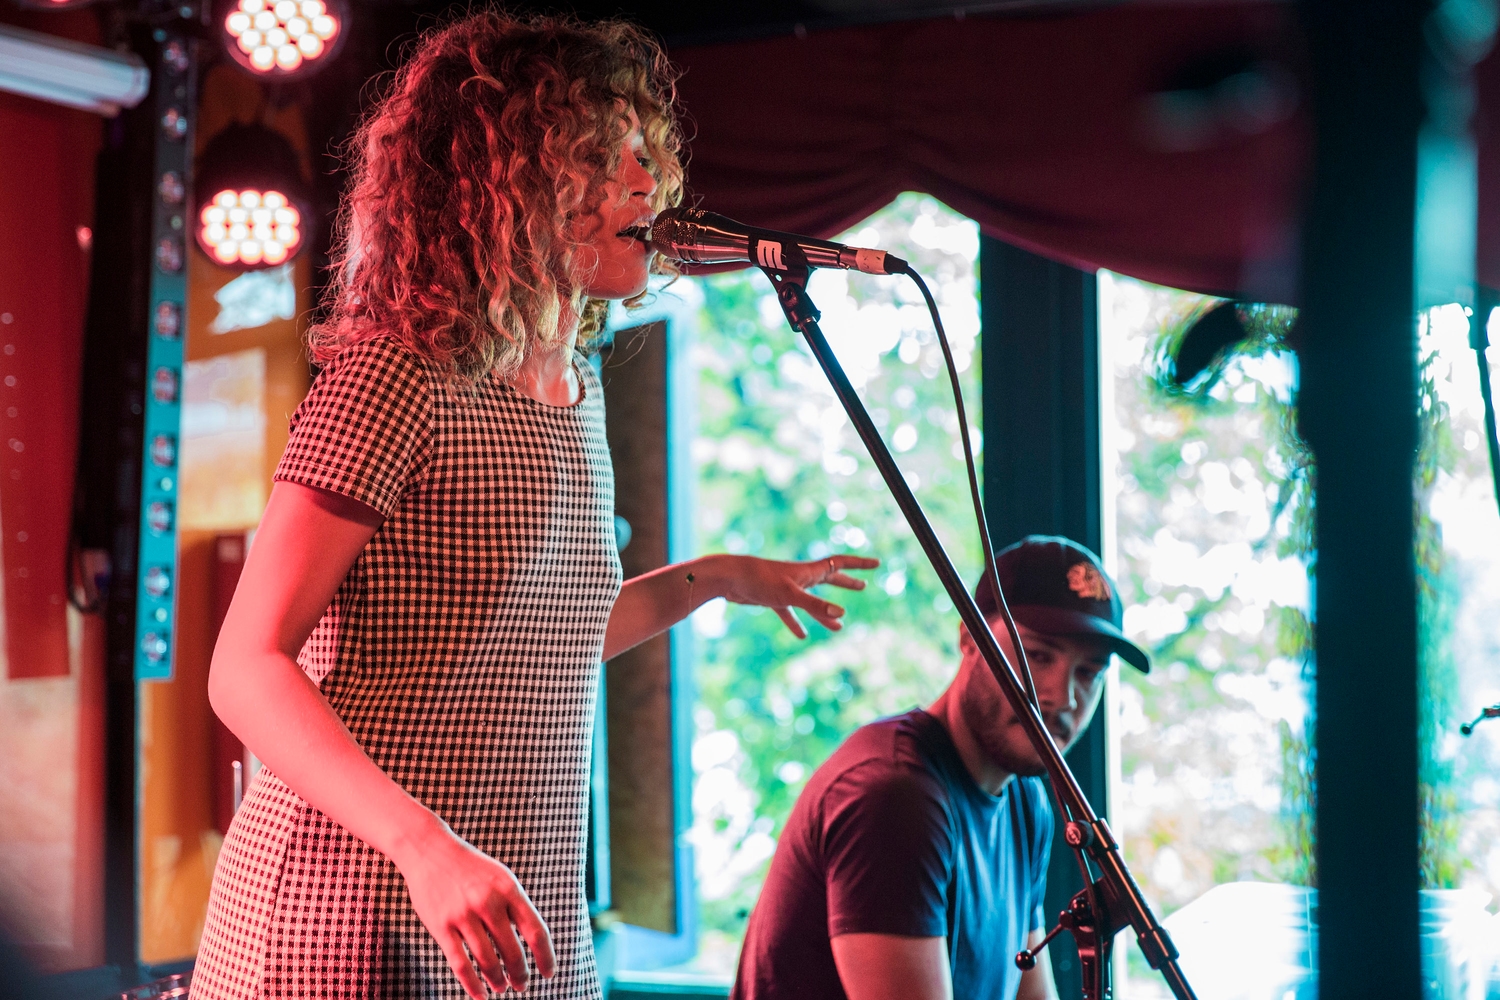 Izzy Bizu, Shame and Jamie Isaac play daytime sets at DIY in the Sky